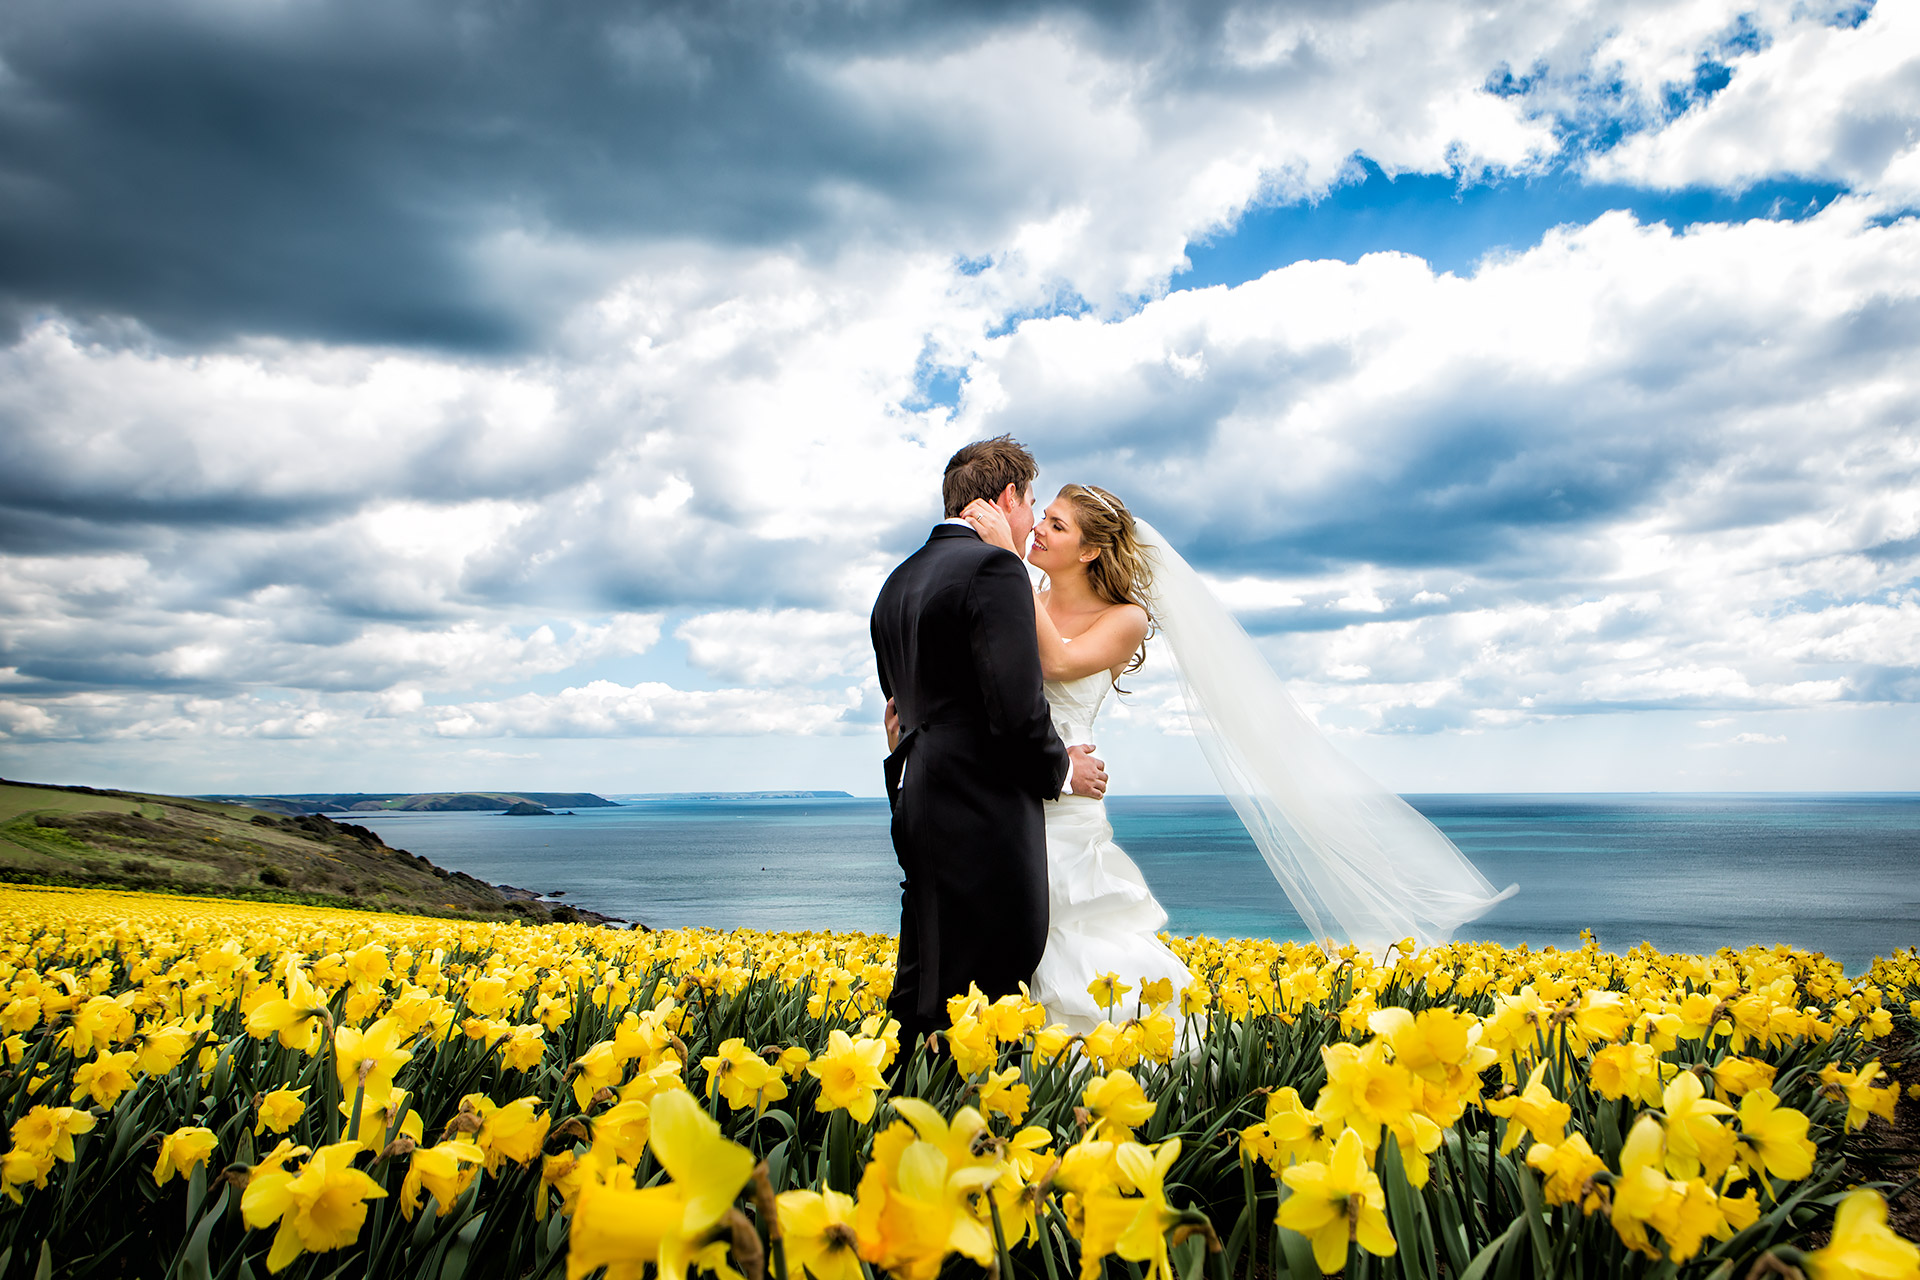 Wedding Photographer Guildford